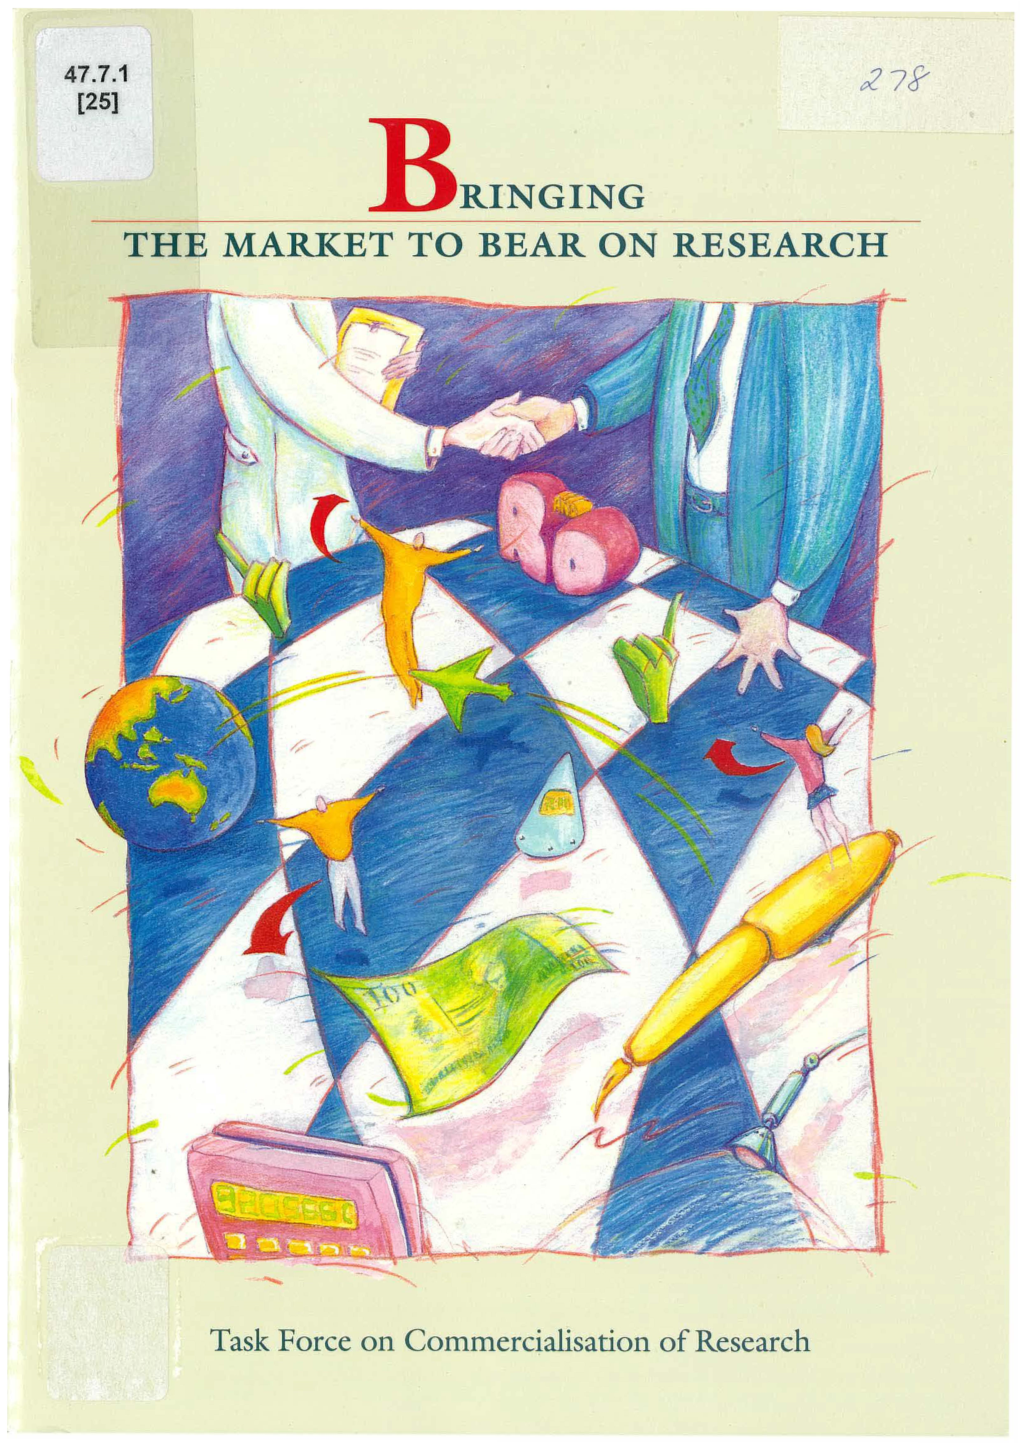 Report of the Task Force on the Commercialisation of Research